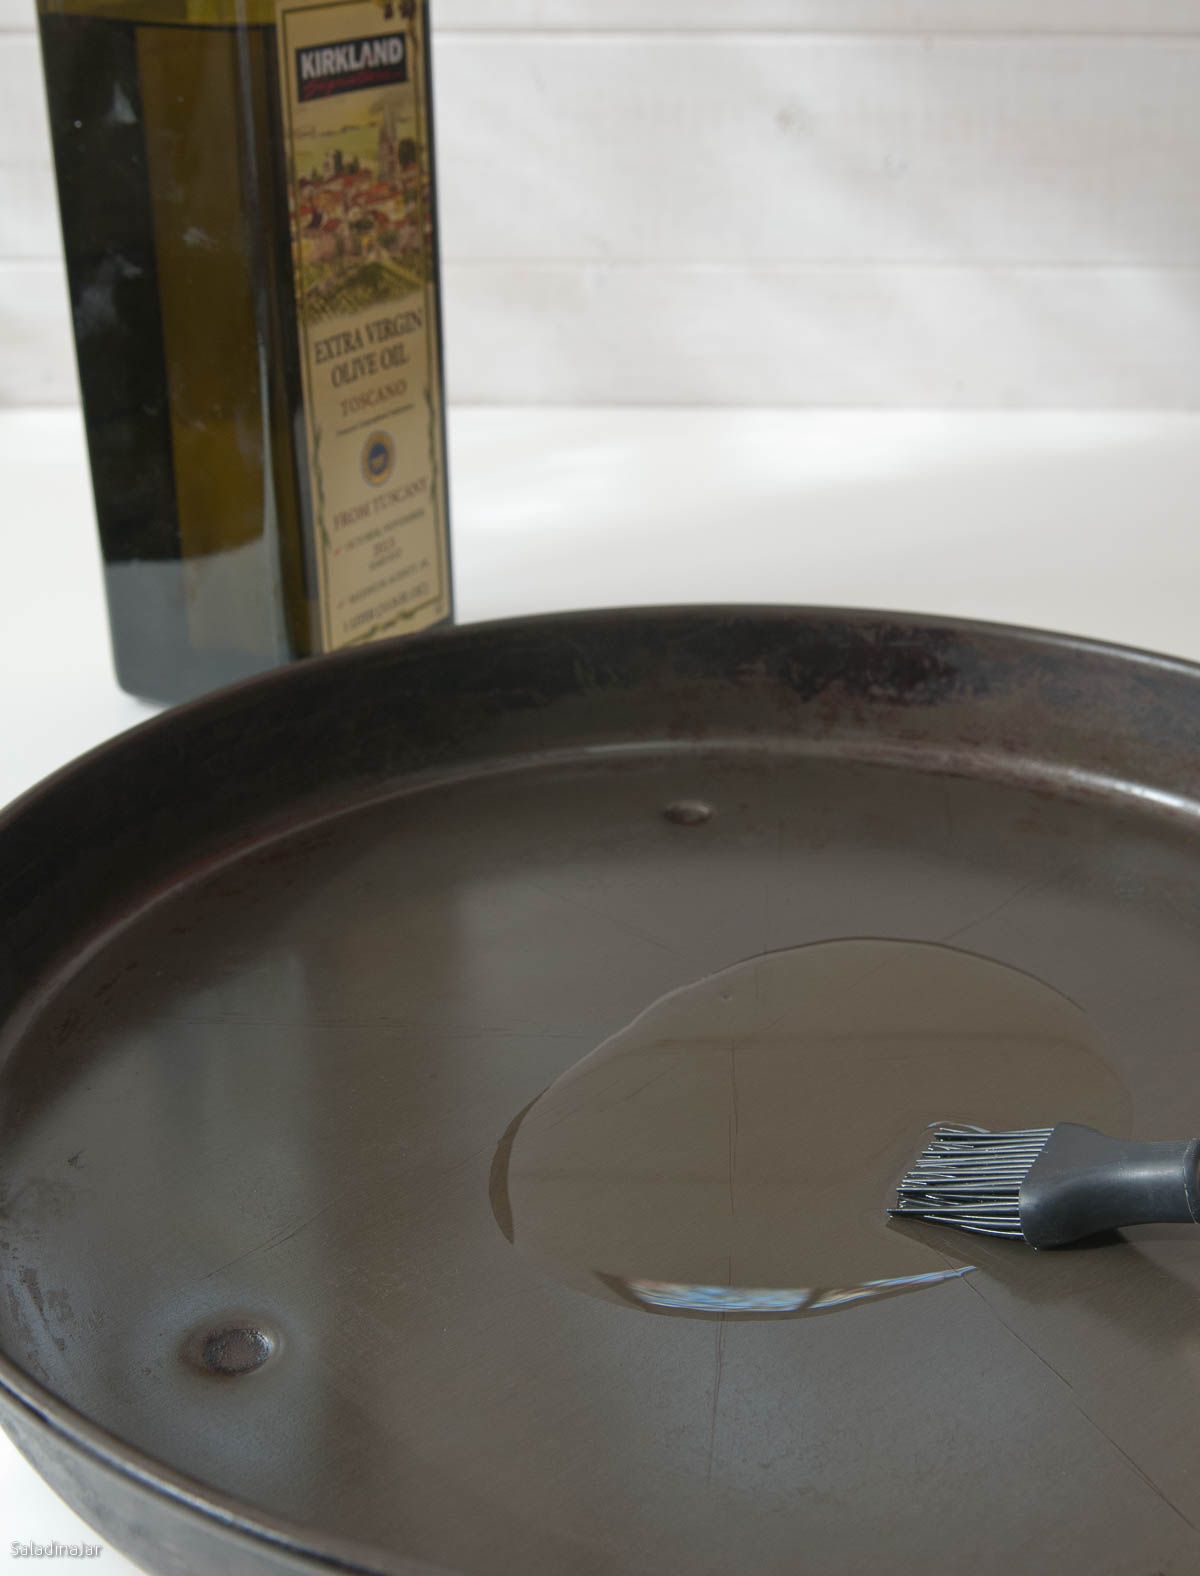 greasing your pan with olive oil.